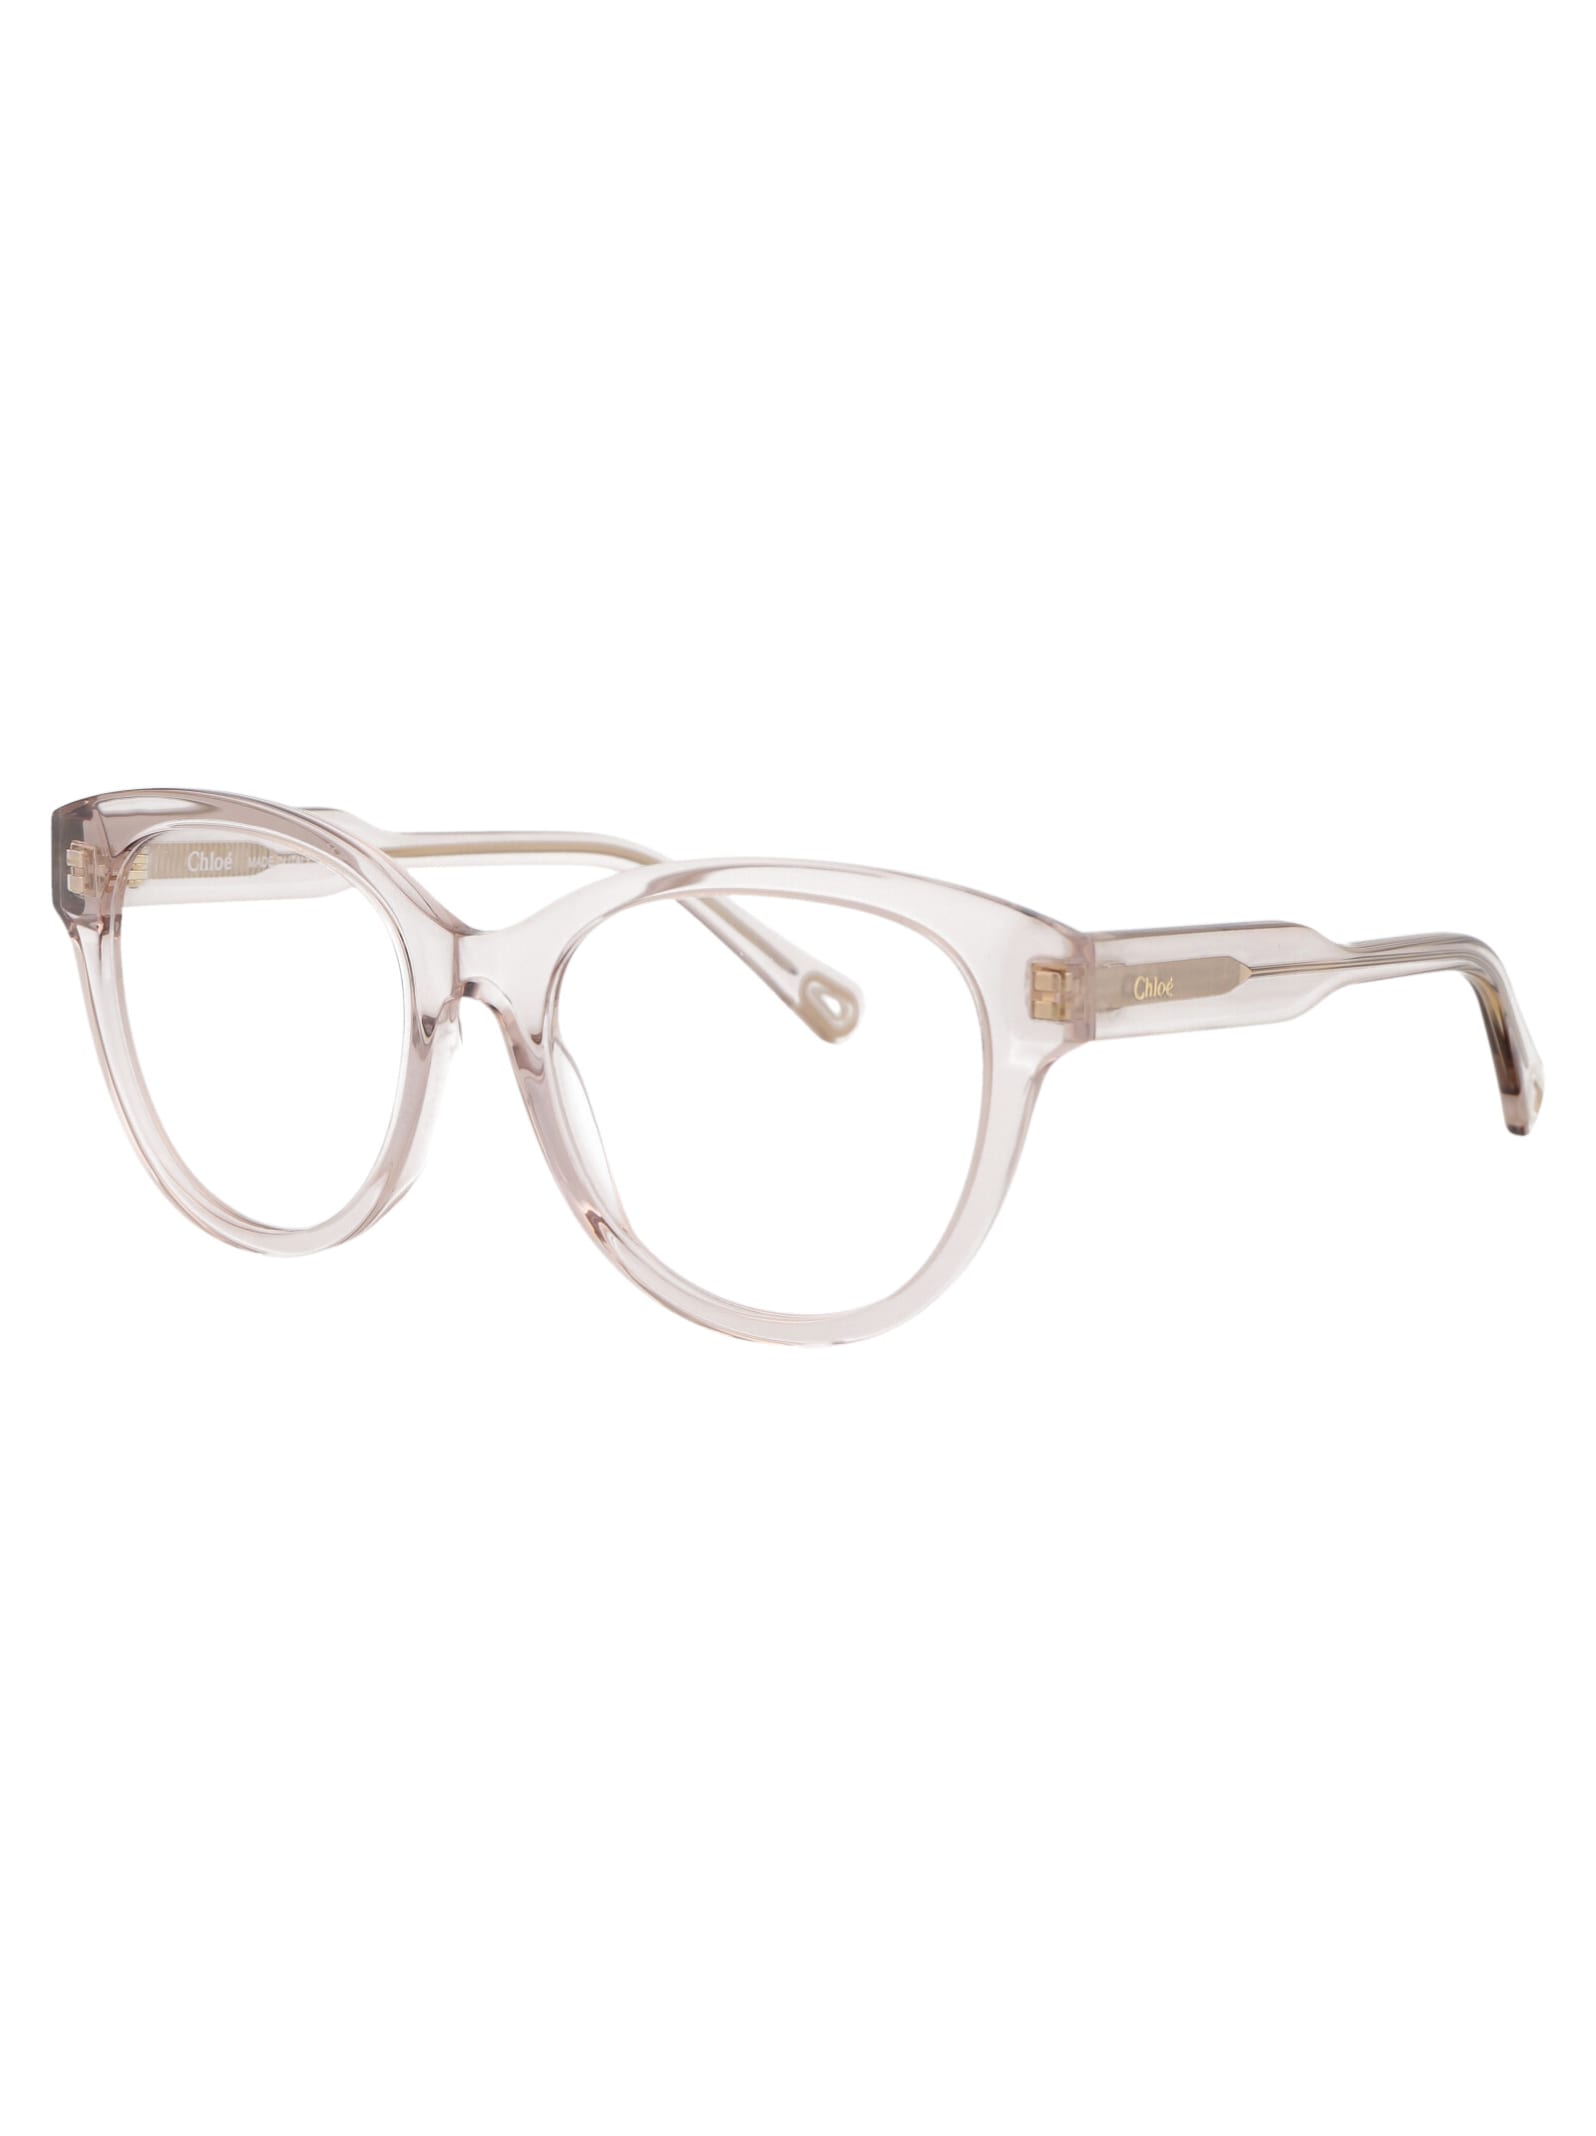 Chloé Ch0163o Glasses In 010 Nude Nude Transparent | ModeSens